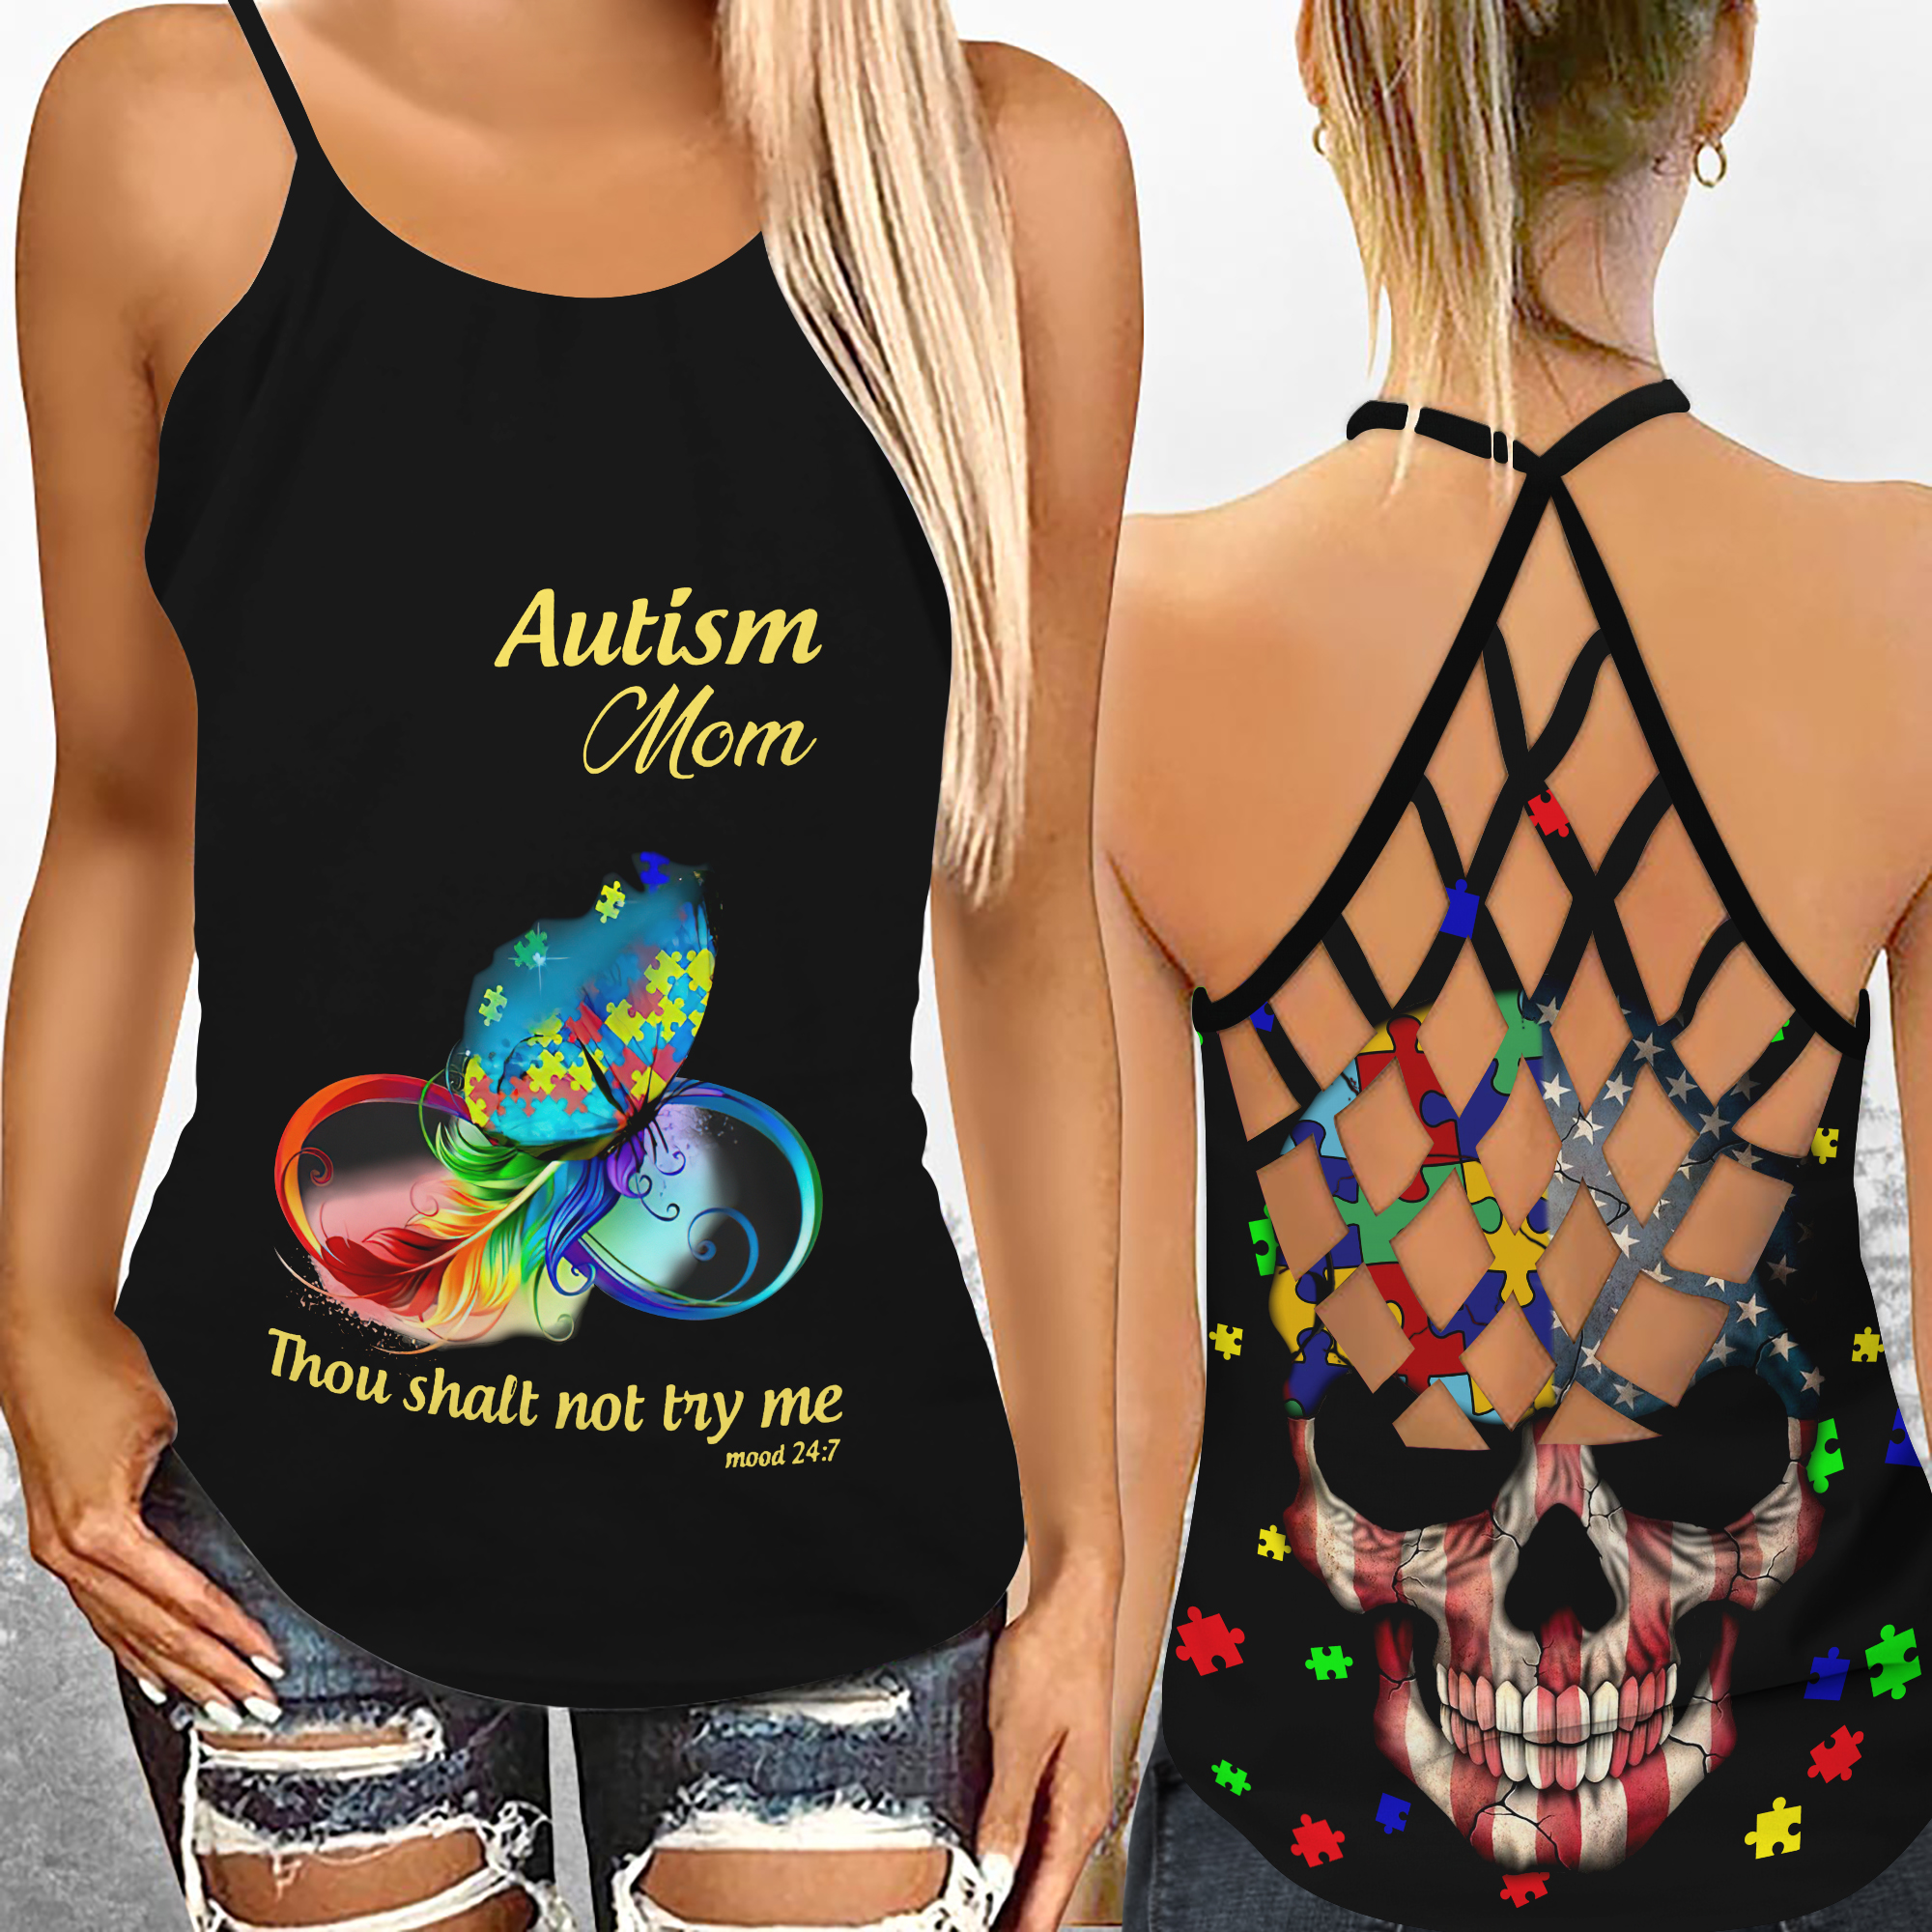 Autism mom thou shalt not try me criss-cross open back camisole tank top – Saleoff 210521